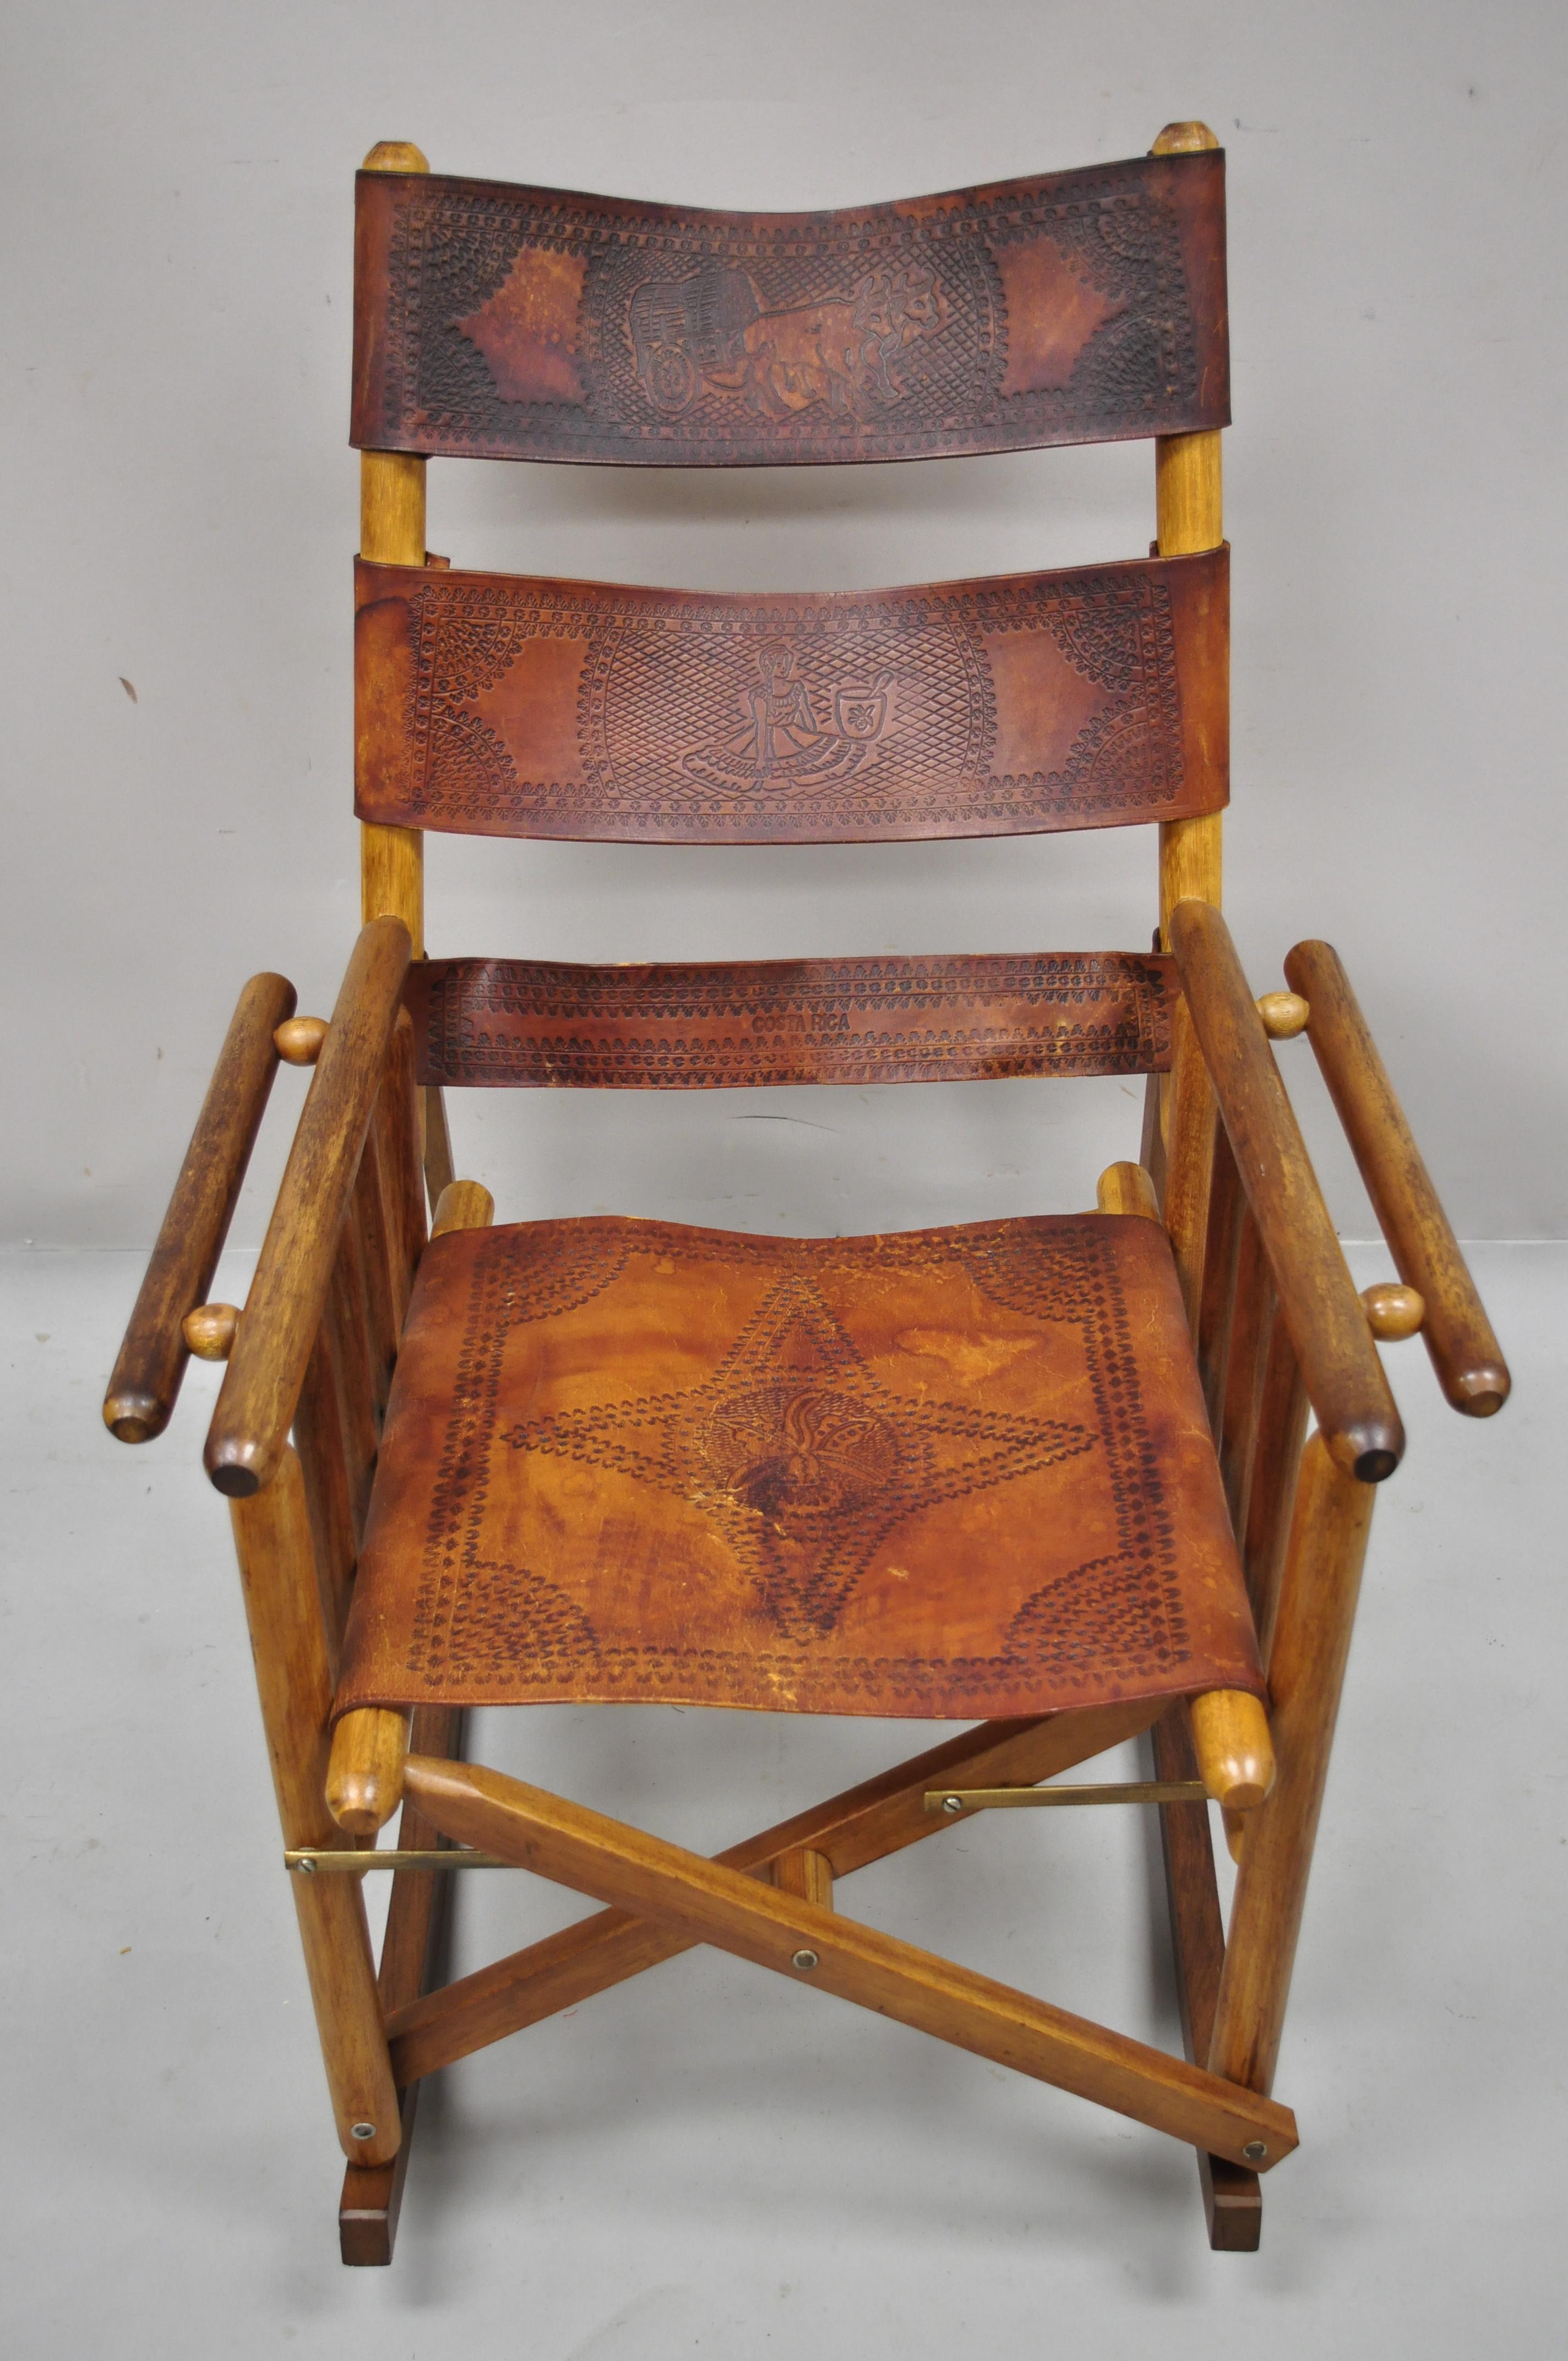 Vintage brown leather Campaign style Costa Rican folding rocking chair rocker. Item features mahogany wood frame, brown leather straps, folding design, engravings to leather, very nice vintage item, great style and form, Circa mid to late 20th